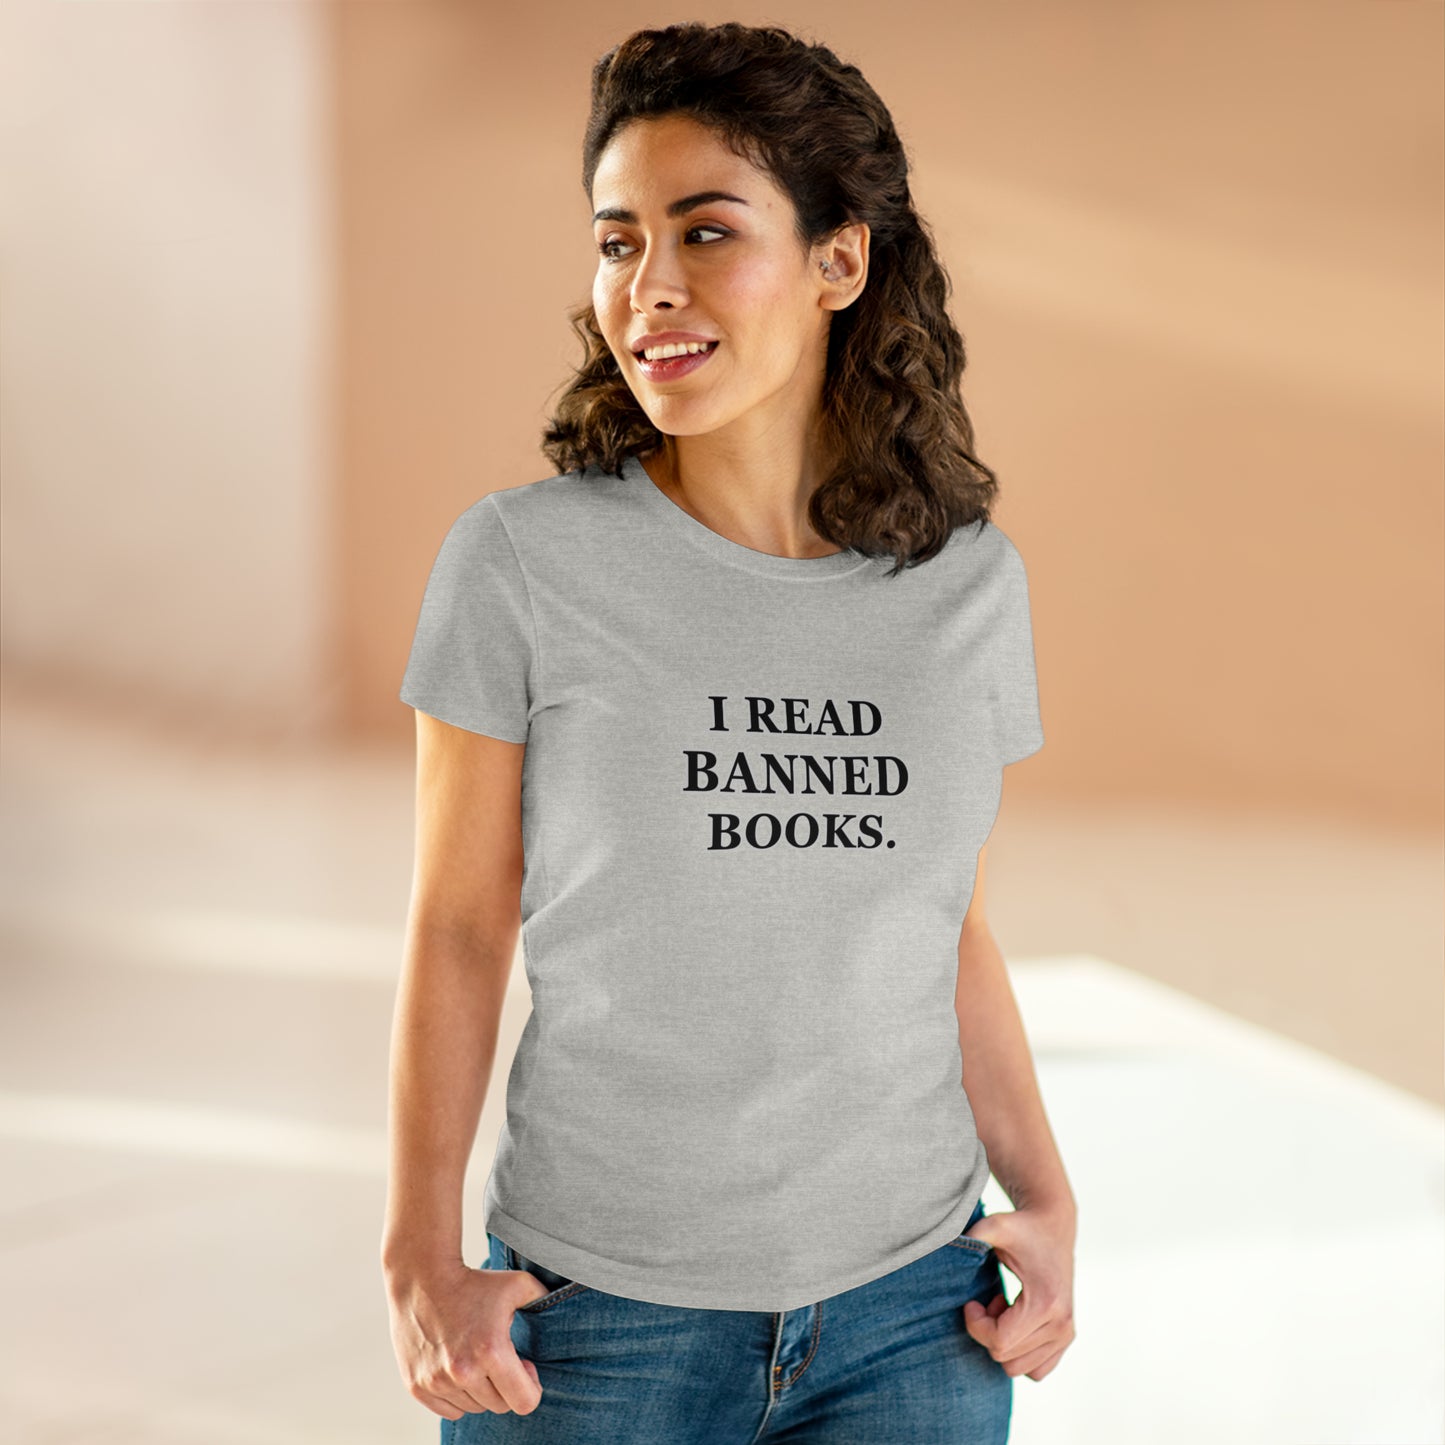 Reading, I Read Banned Books, Things, Books- Adult, Semi-fitted, Smaller Size Image T-Shirt